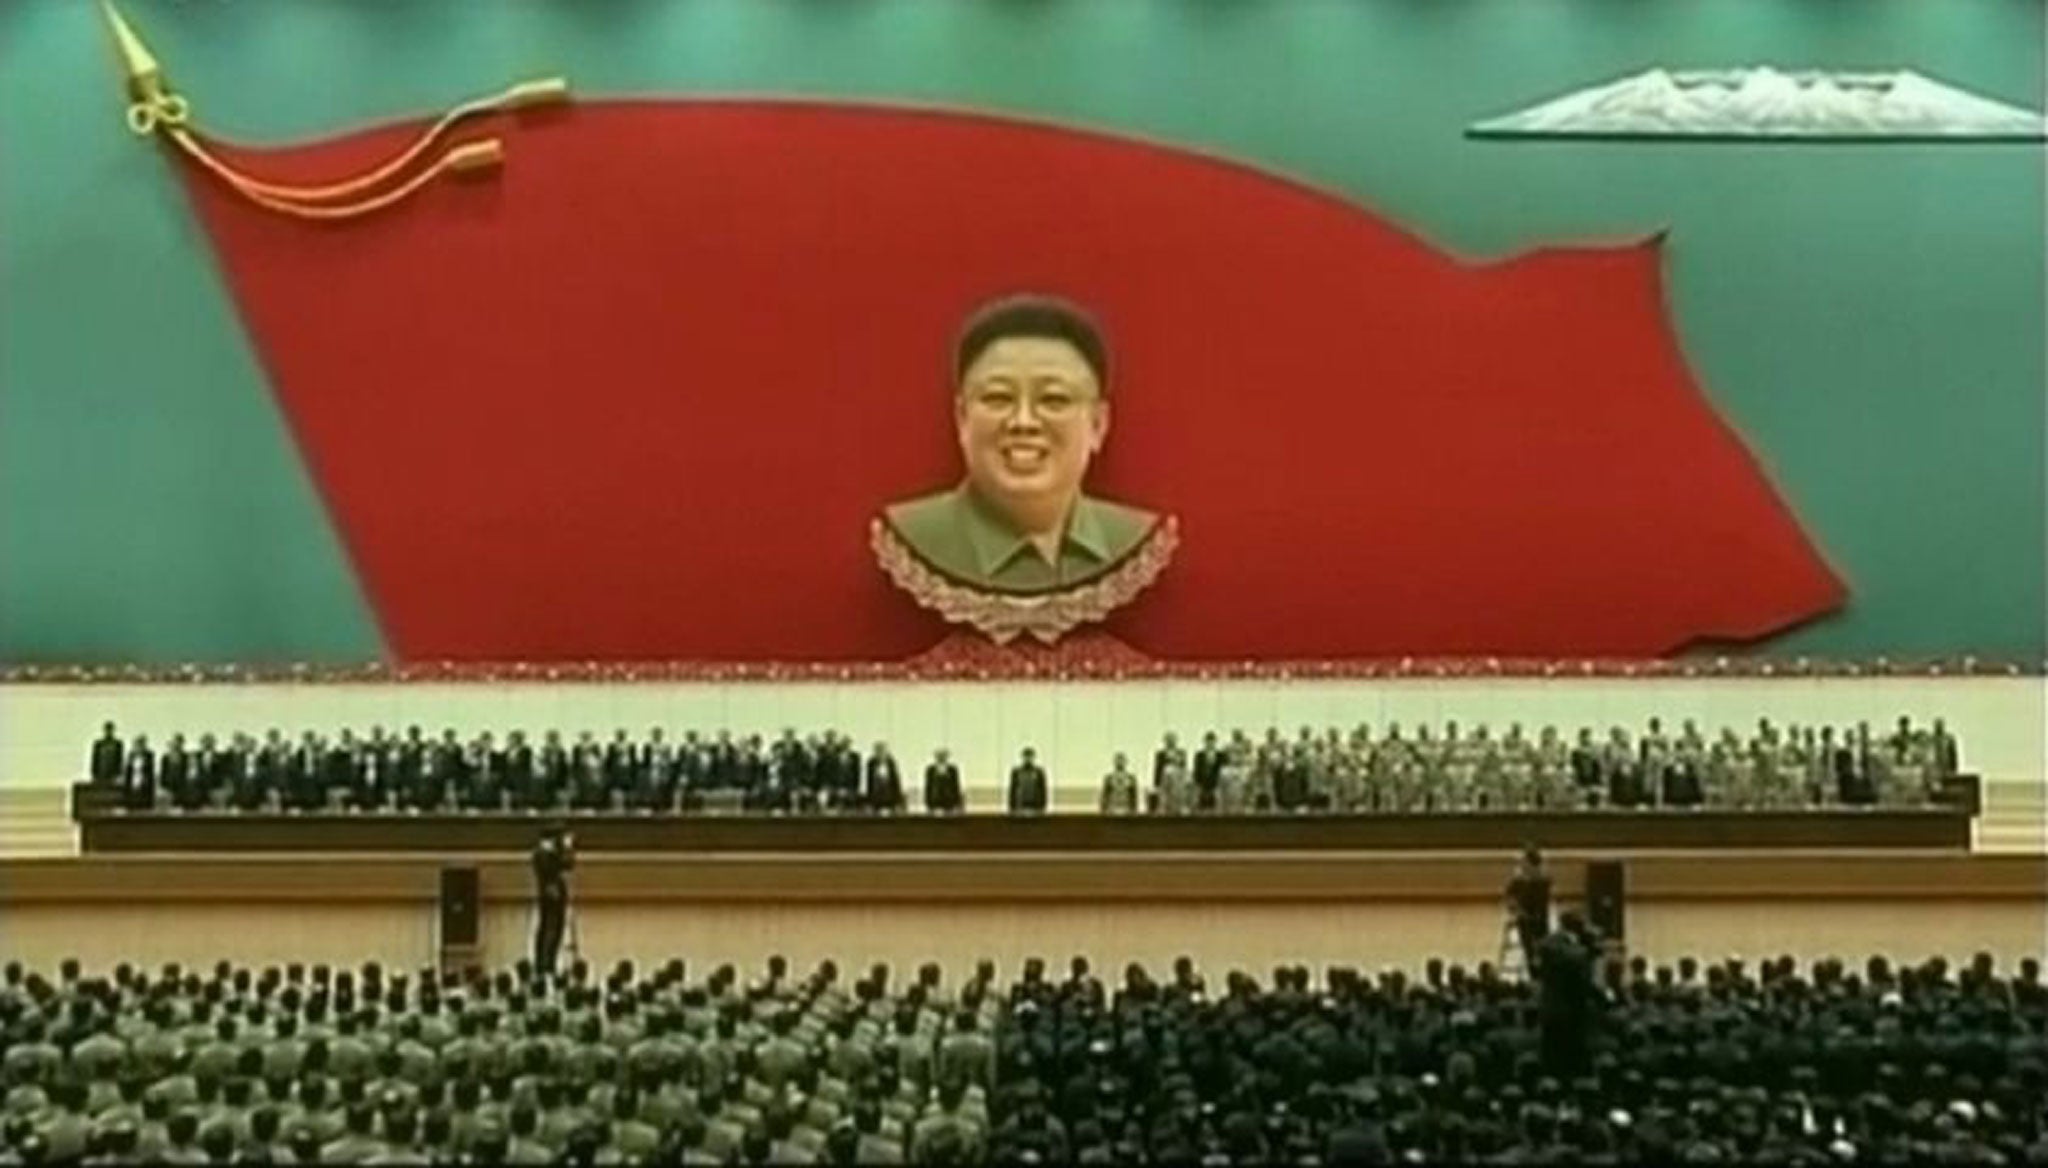 In this image taken from state media coverage, North Korean leader Kim Jong Un, centre, attends an event to mark the second anniversary of the death of his father, former leader Kim Jong Il